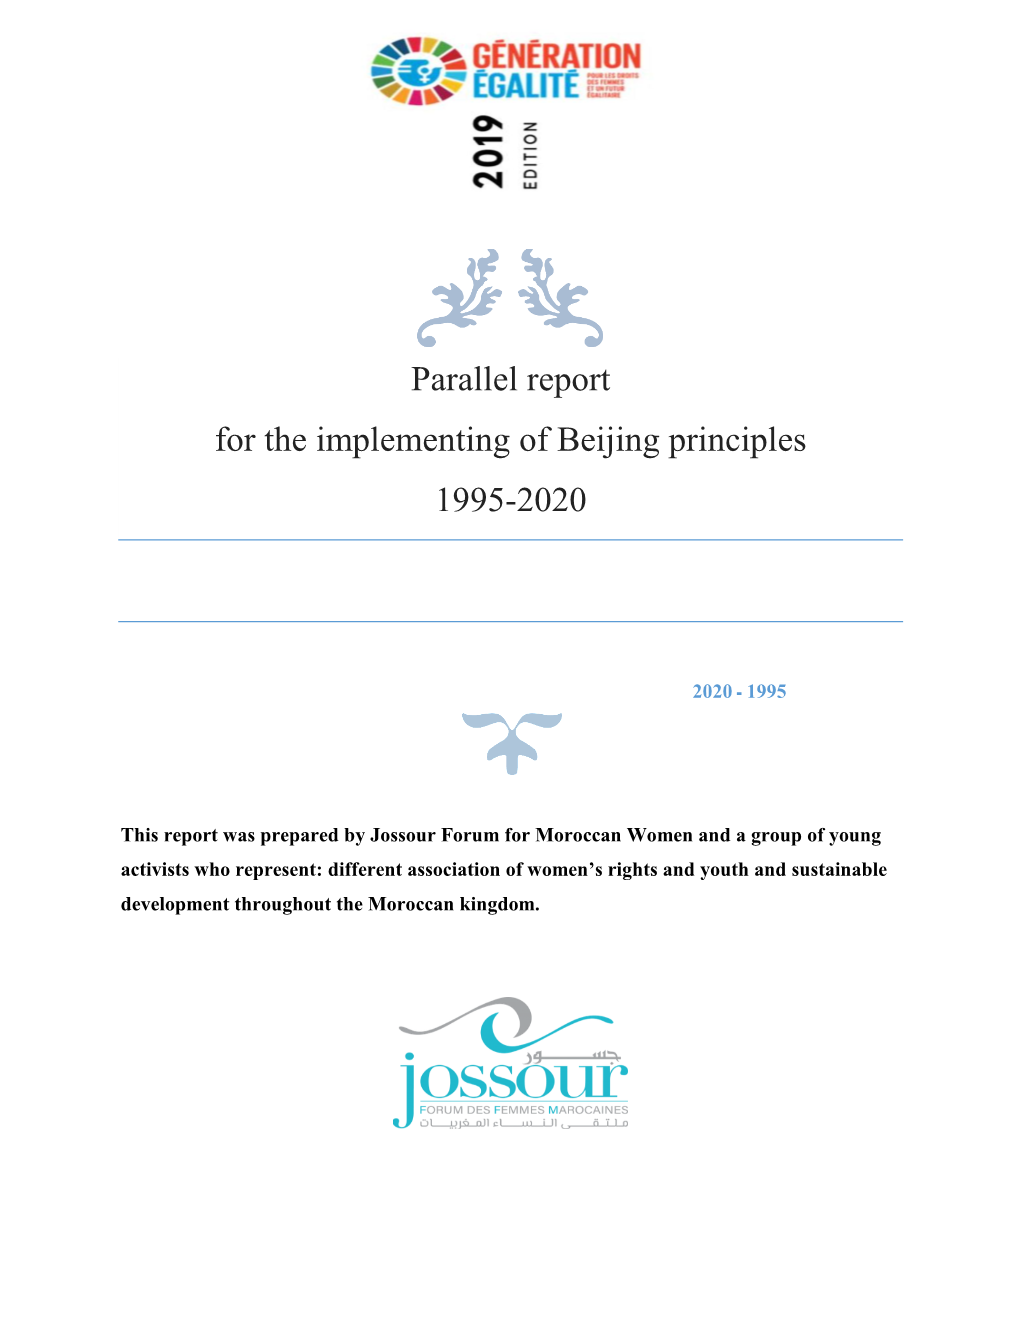 Parallel Report for the Implementing of Beijing Principles 1995-2020